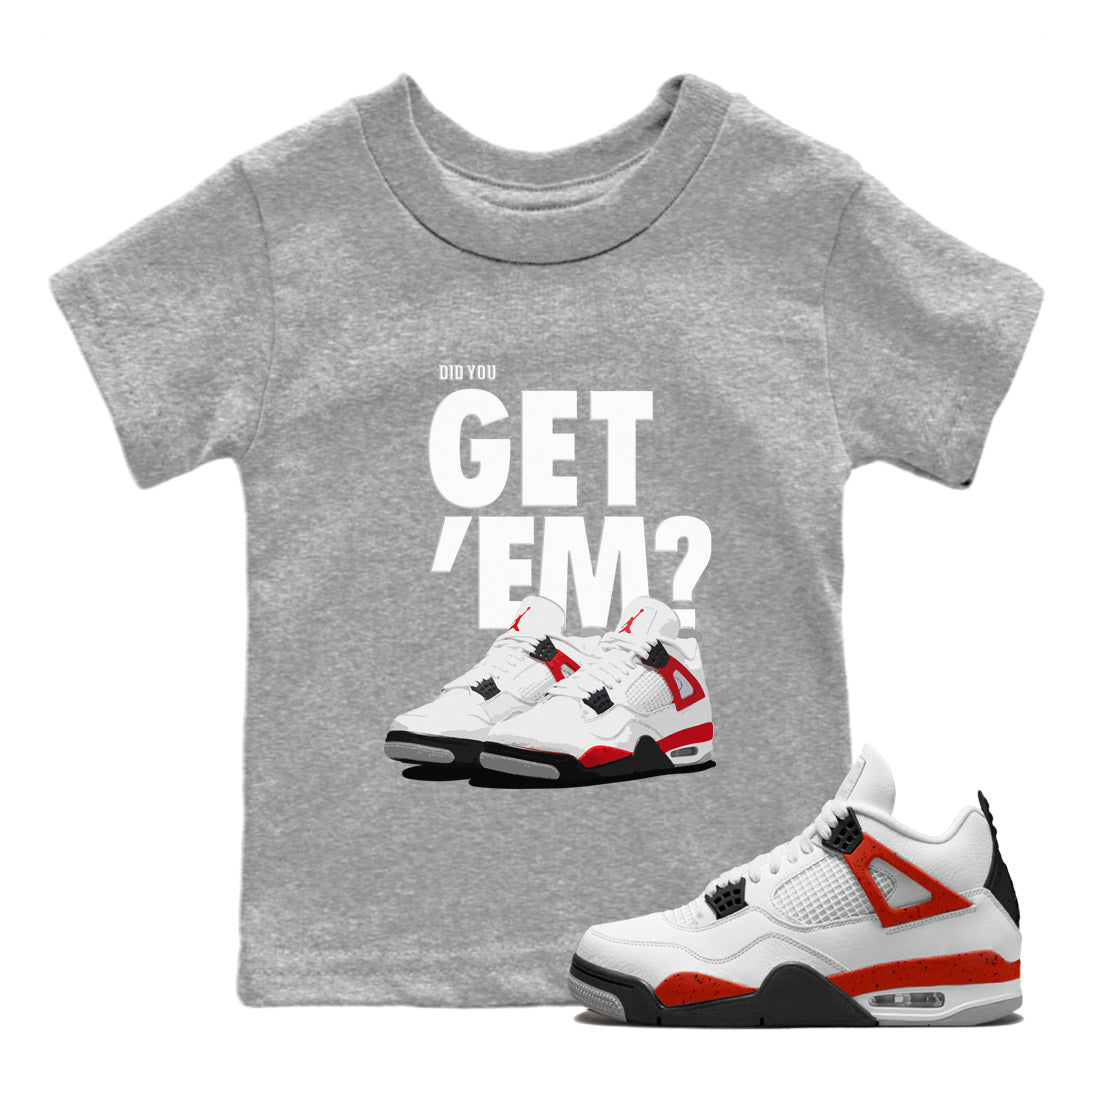 Jordan 4 Red Cement Tees Outfits Did You Get 'Em SNRT Sneaker Tees Air Jordan 4 Red Cement SNRT Sneaker Release Tees Kids Shirts To Match Jordan Heather Grey 1